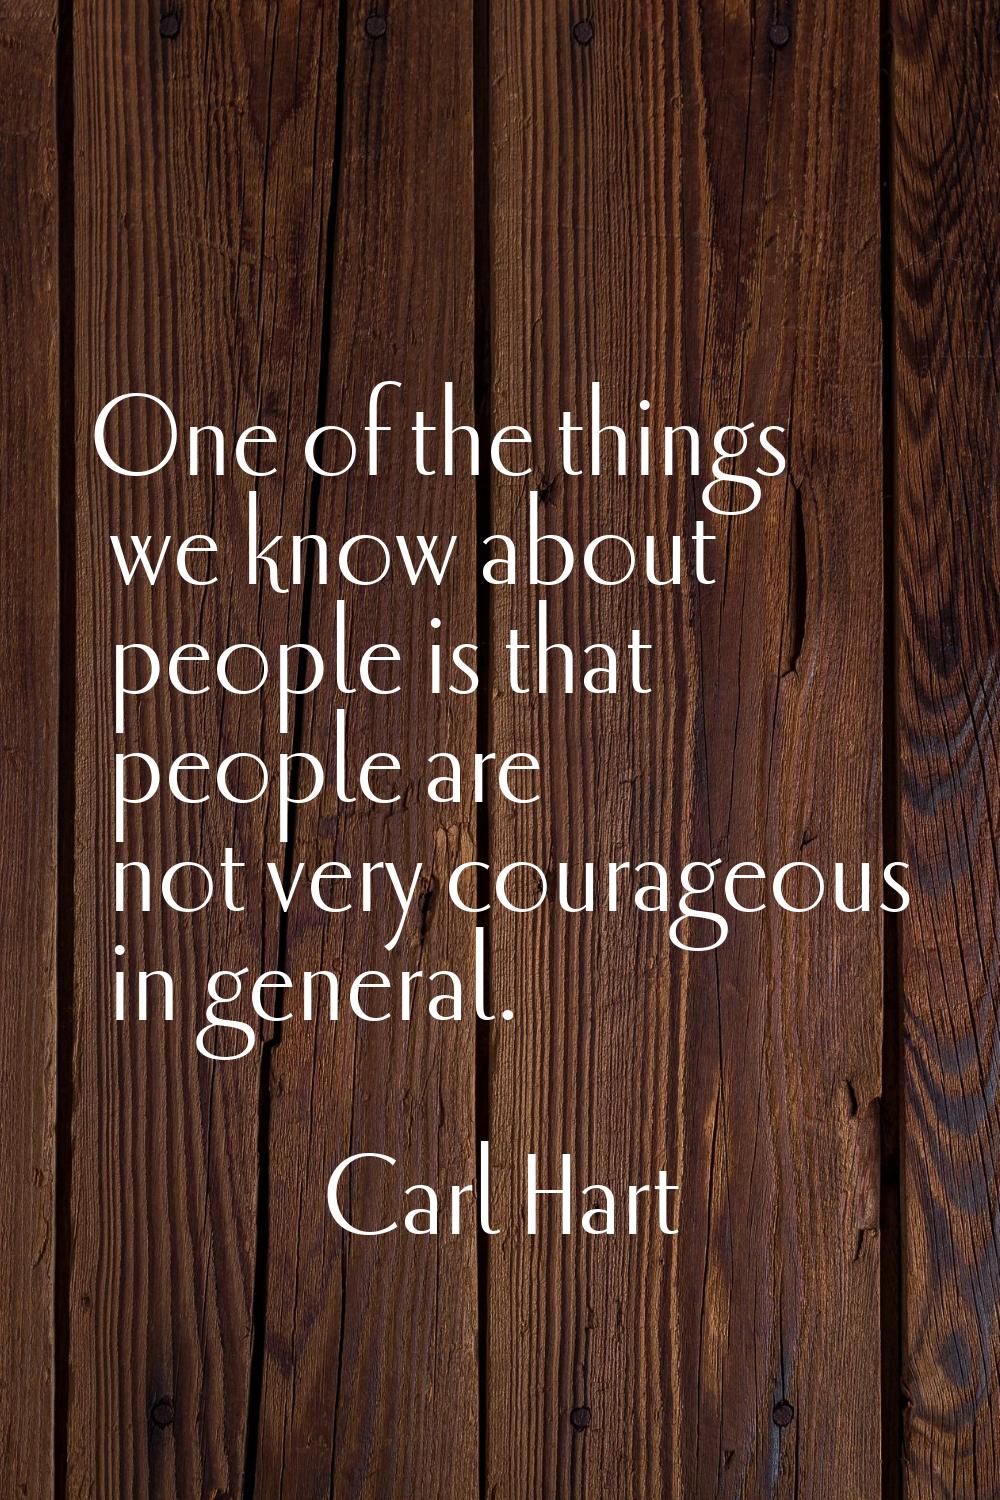 One of the things we know about people is that people are not very courageous in general.